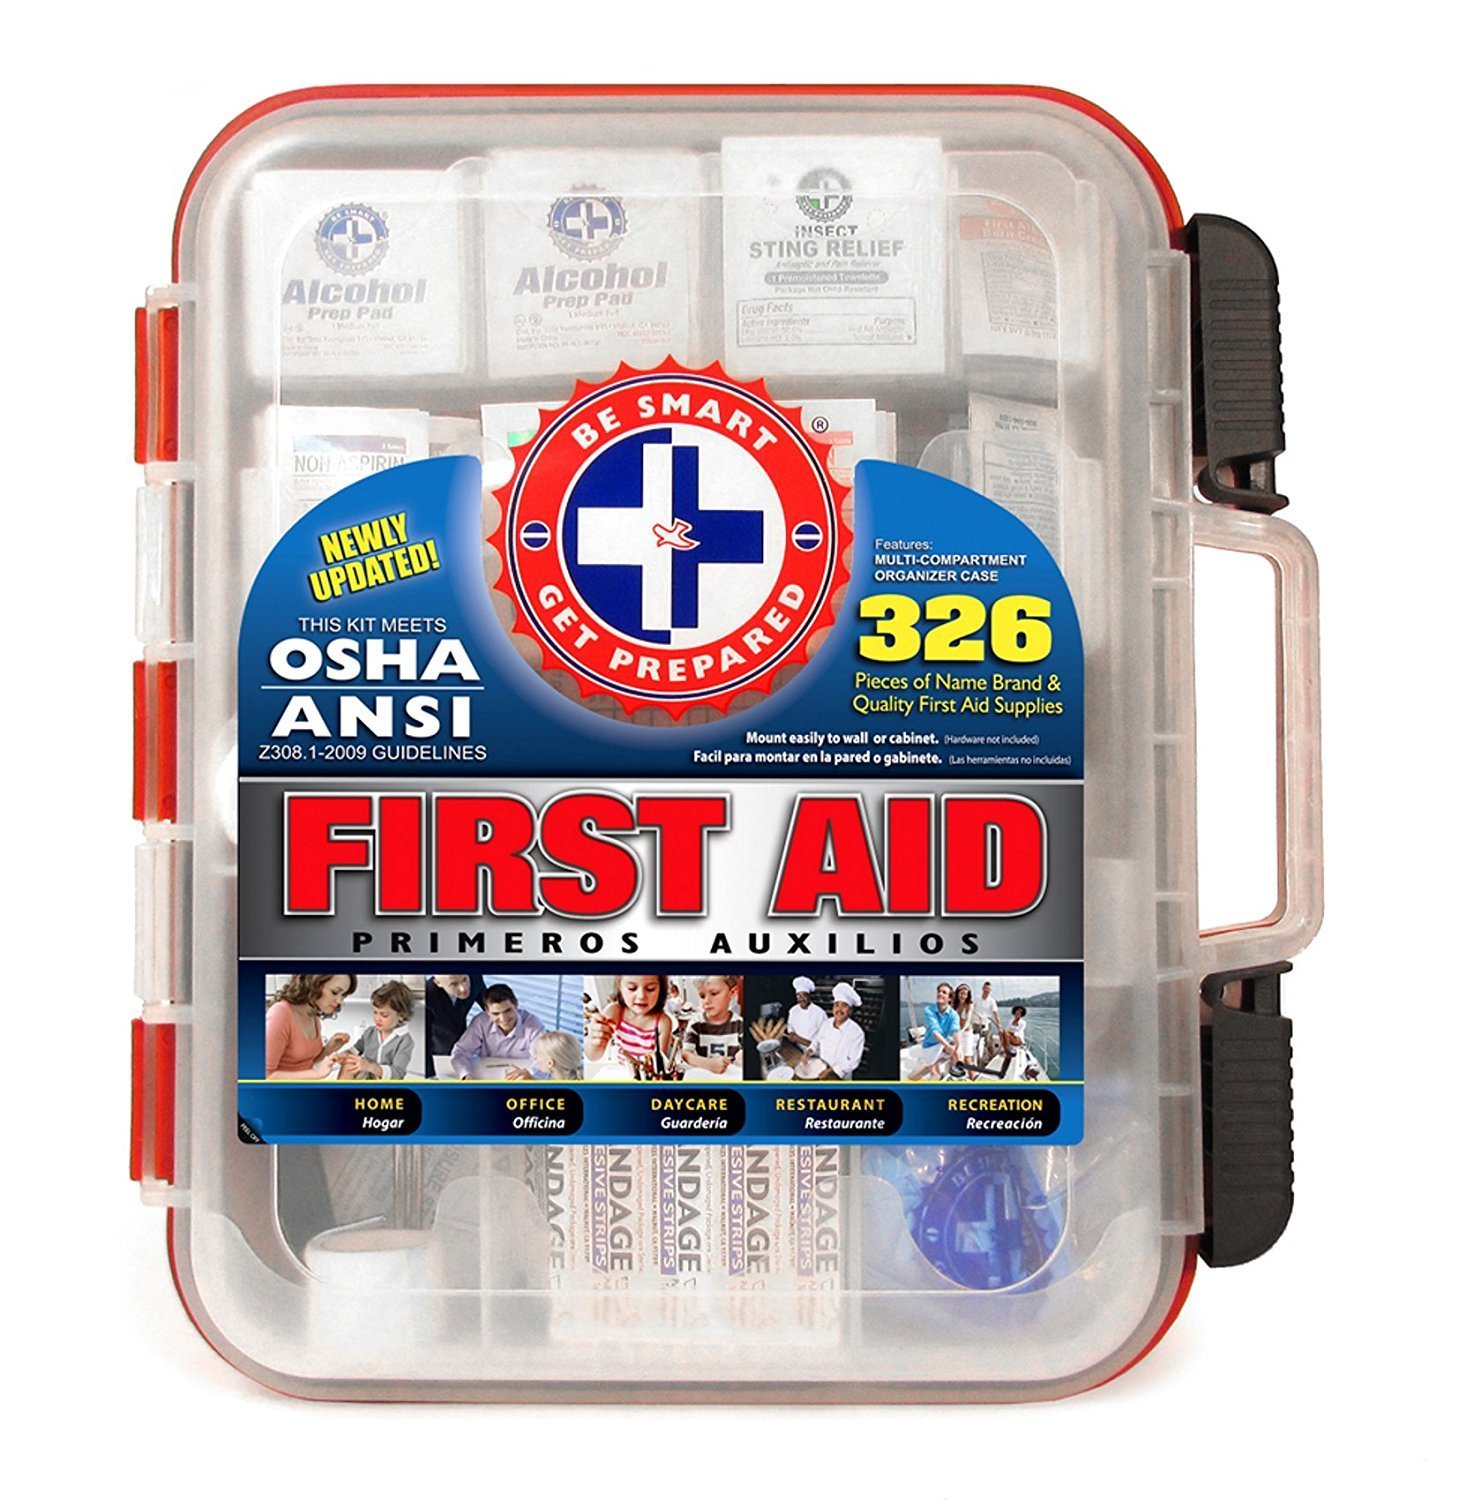 Save Big on a First Aid Kit in Hard Red Case – Contains 326 Pieces – Just $26.24!